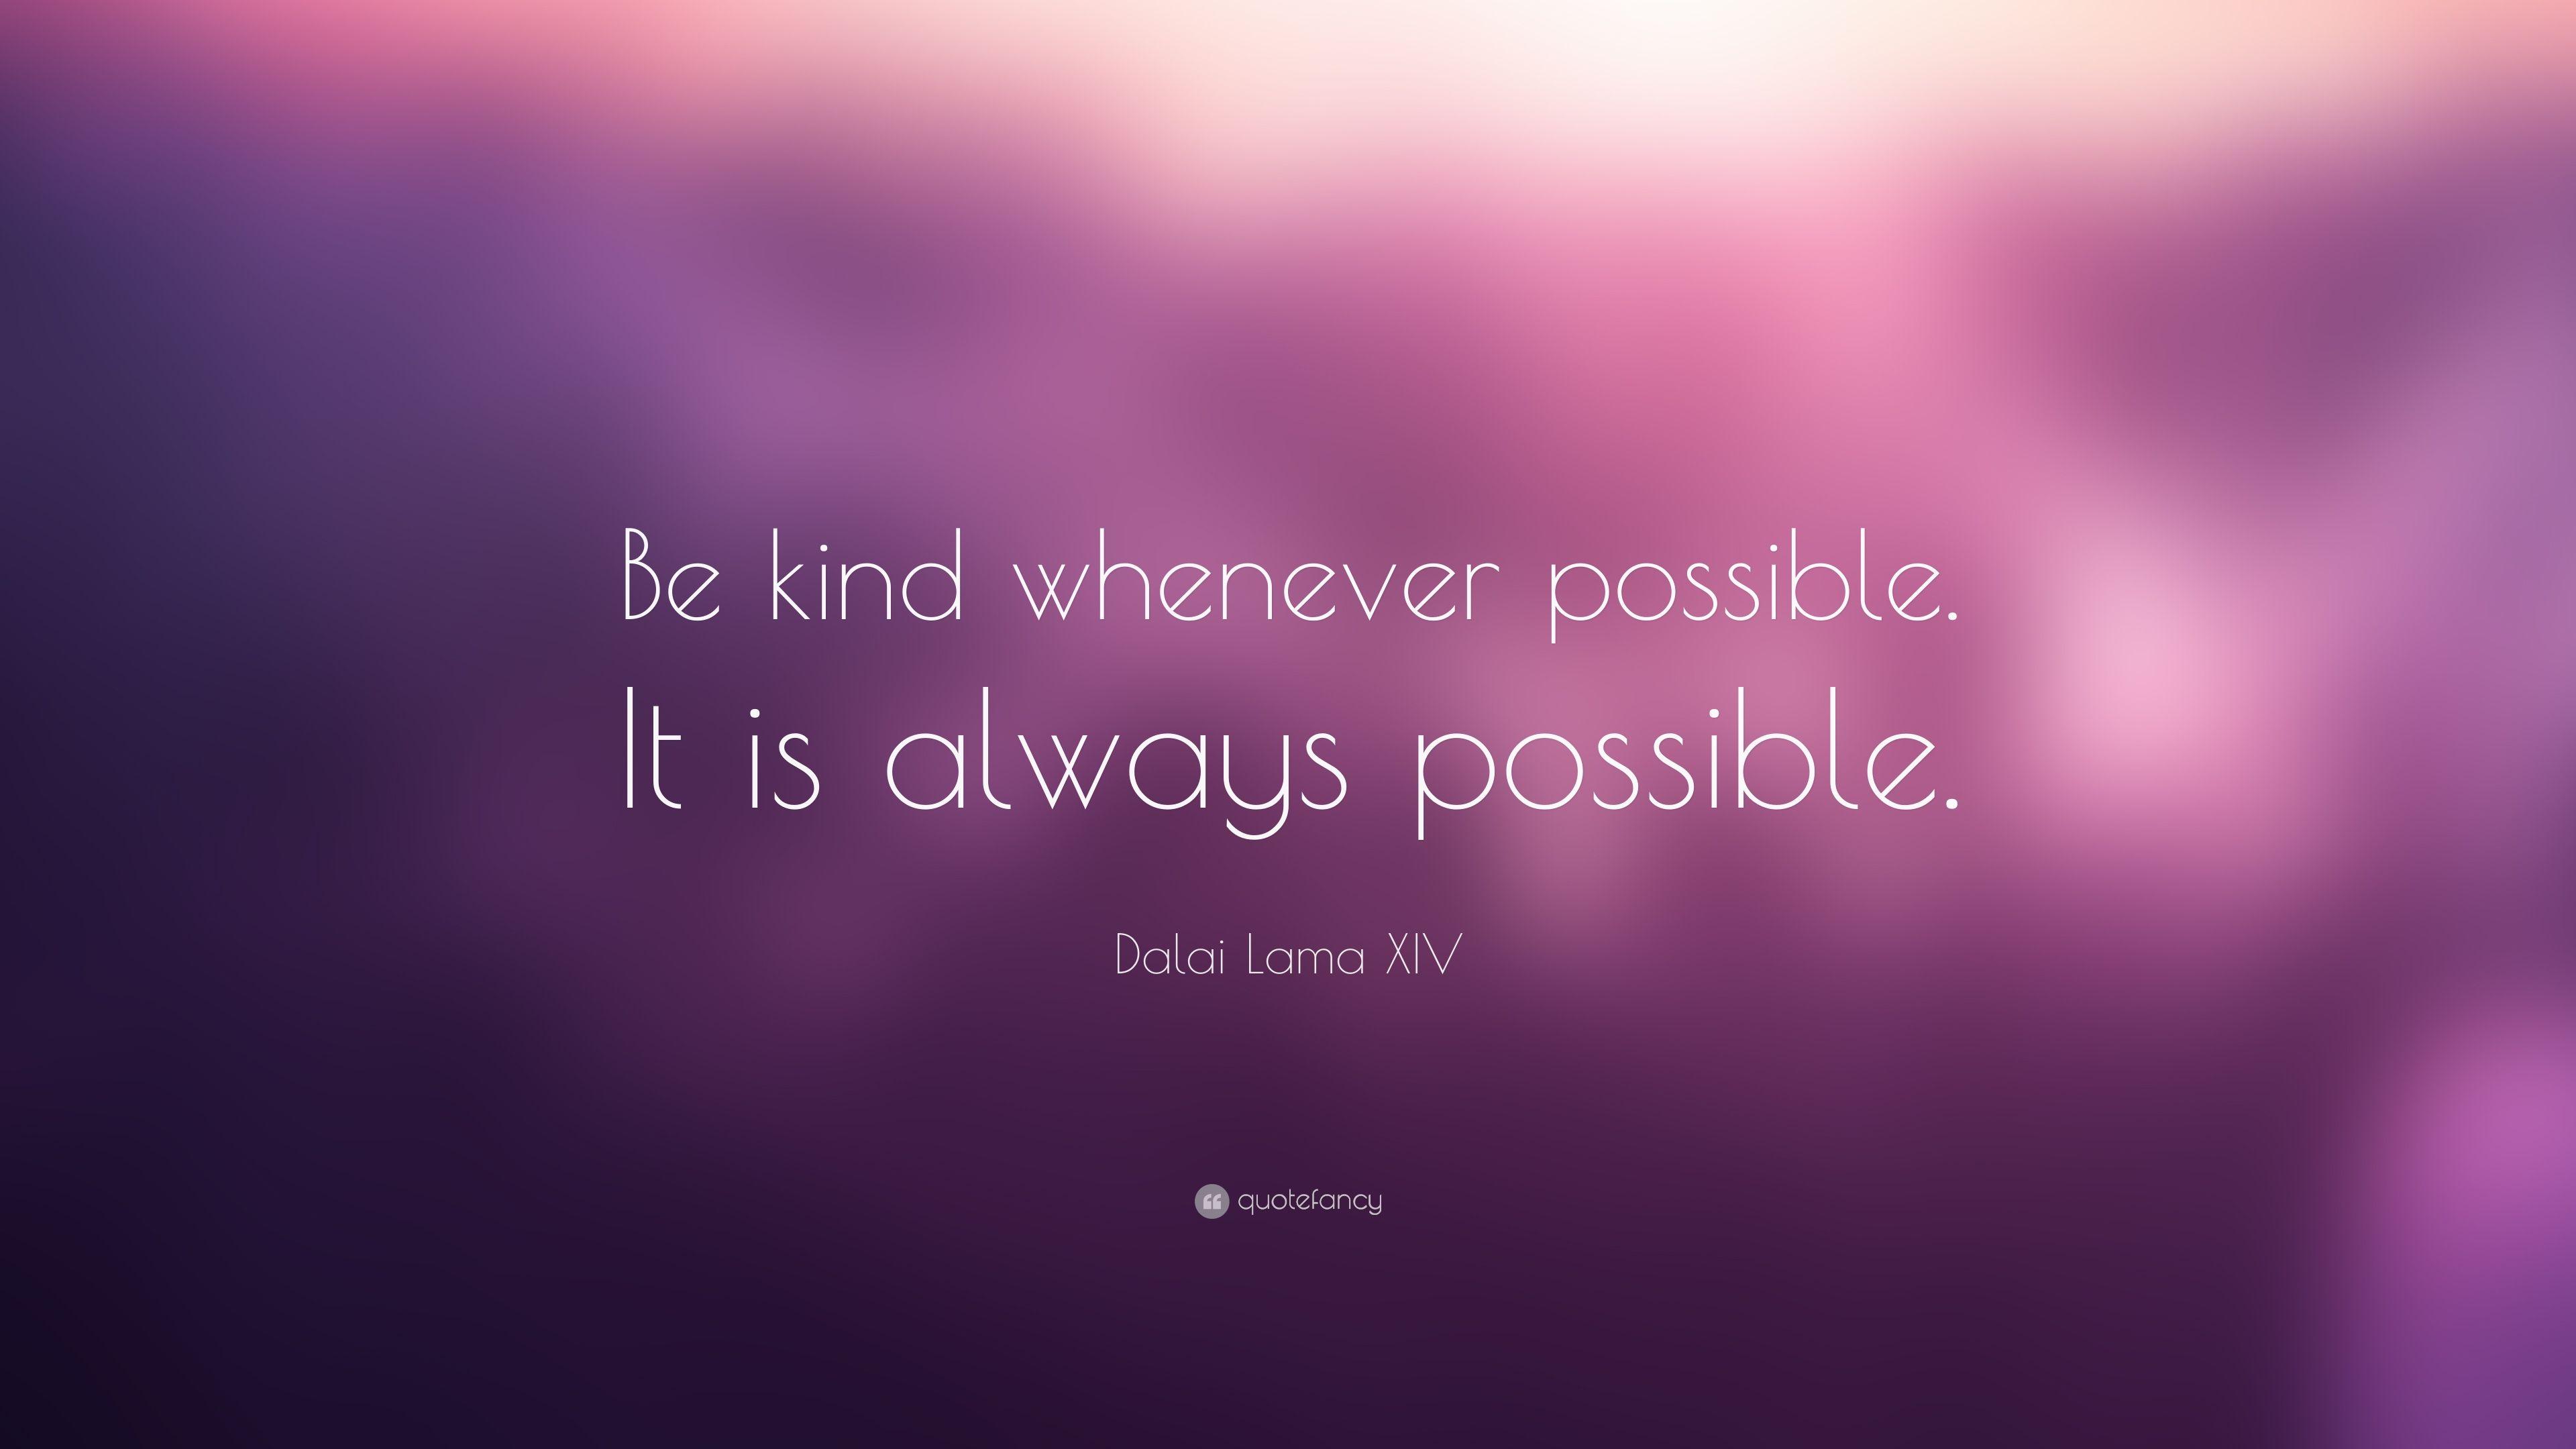 Dalai Lama XIV Quote: “Be kind whenever possible. It is always